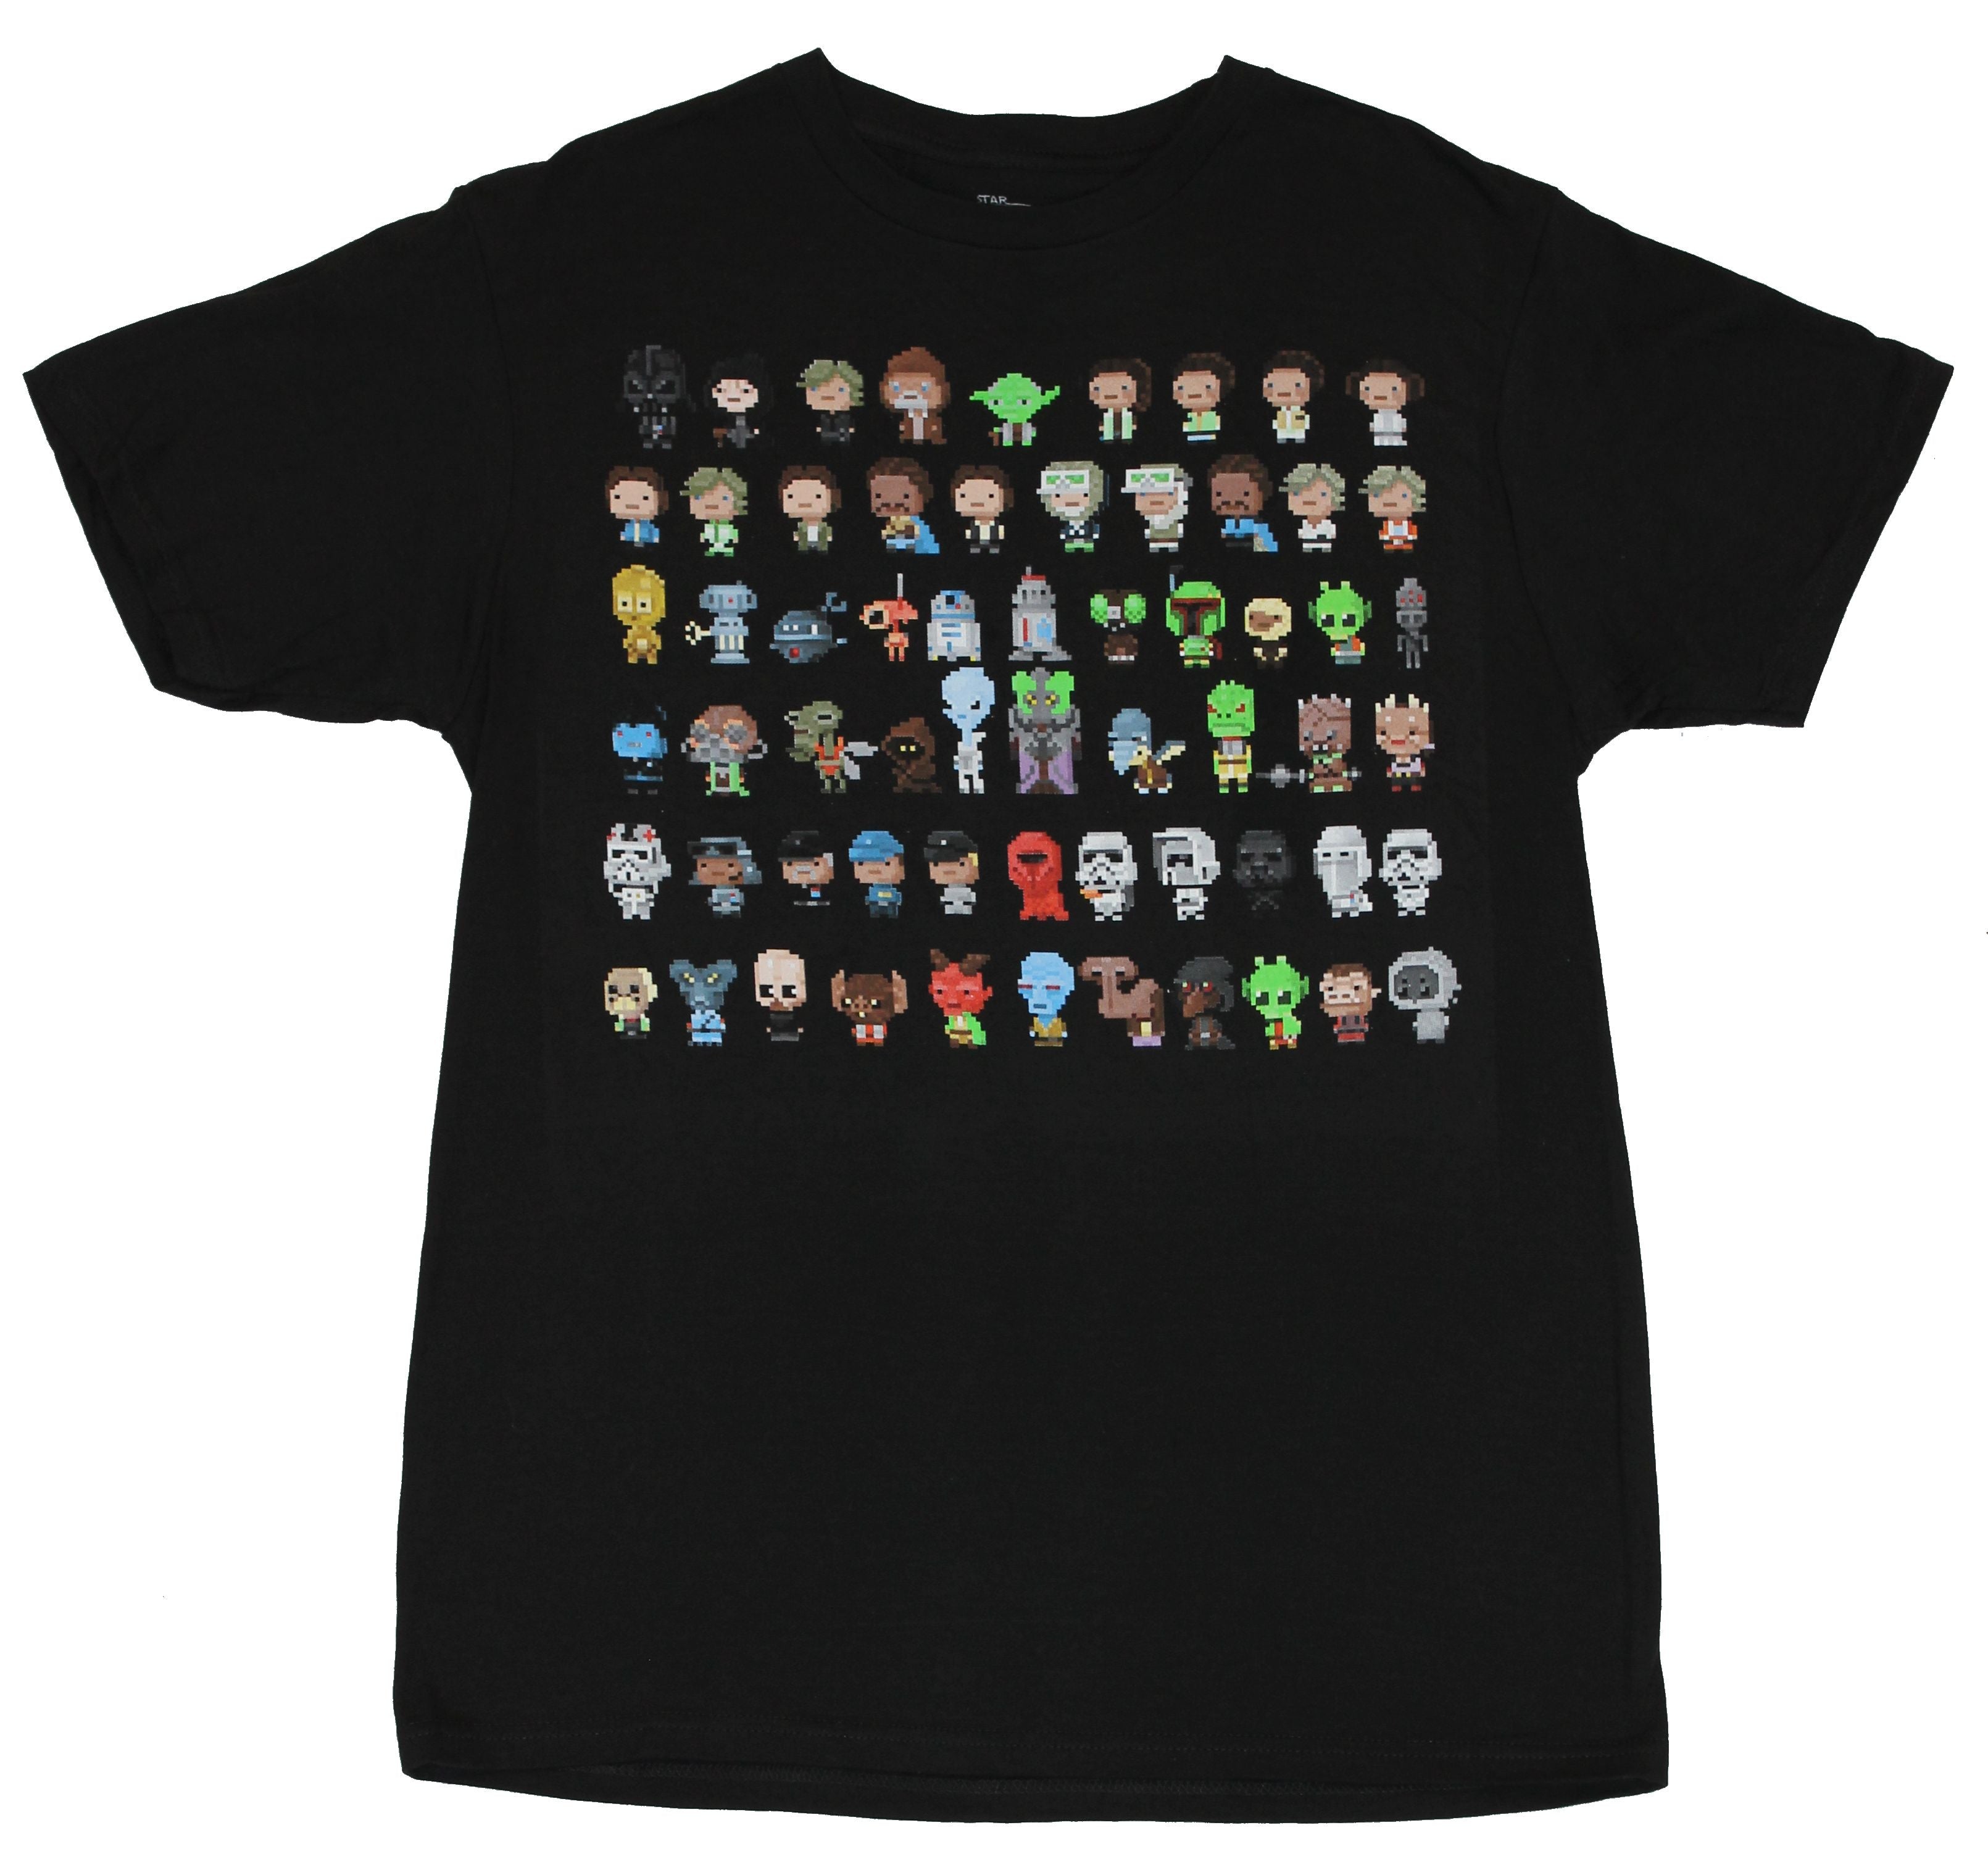 Star Wars  Mens T-Shirt - Tiny Death Star 54 Classic Pixelated Character Images